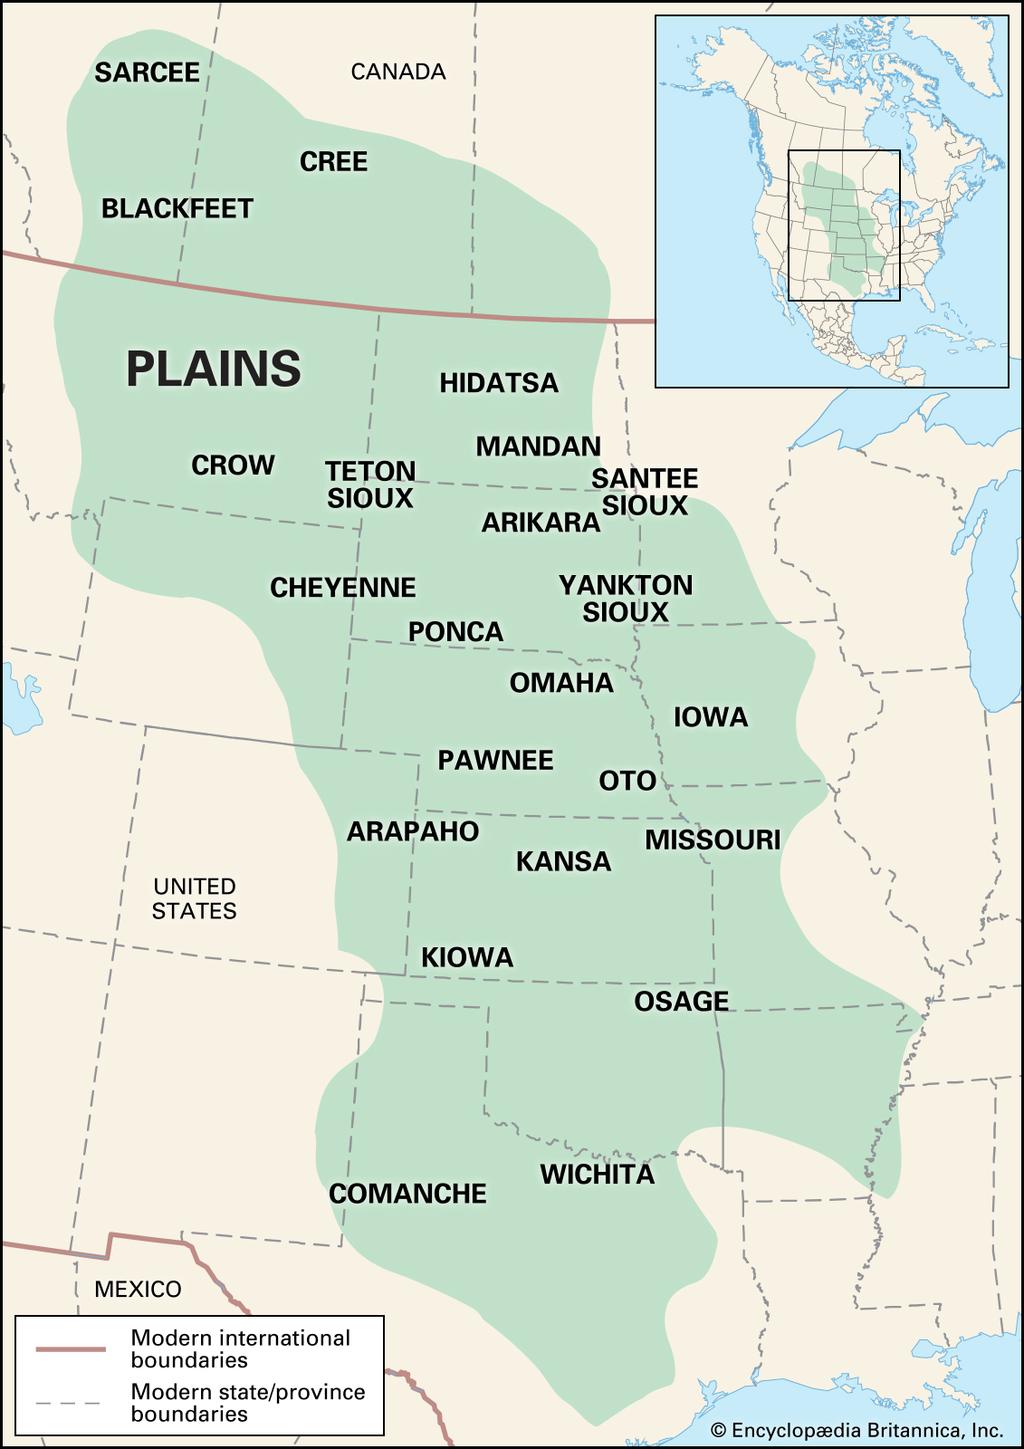 The Plains Native Americans traditionally lived on the Great Plains of the United States and Canada. The Great Plains is a vast grassland at the center of North America.